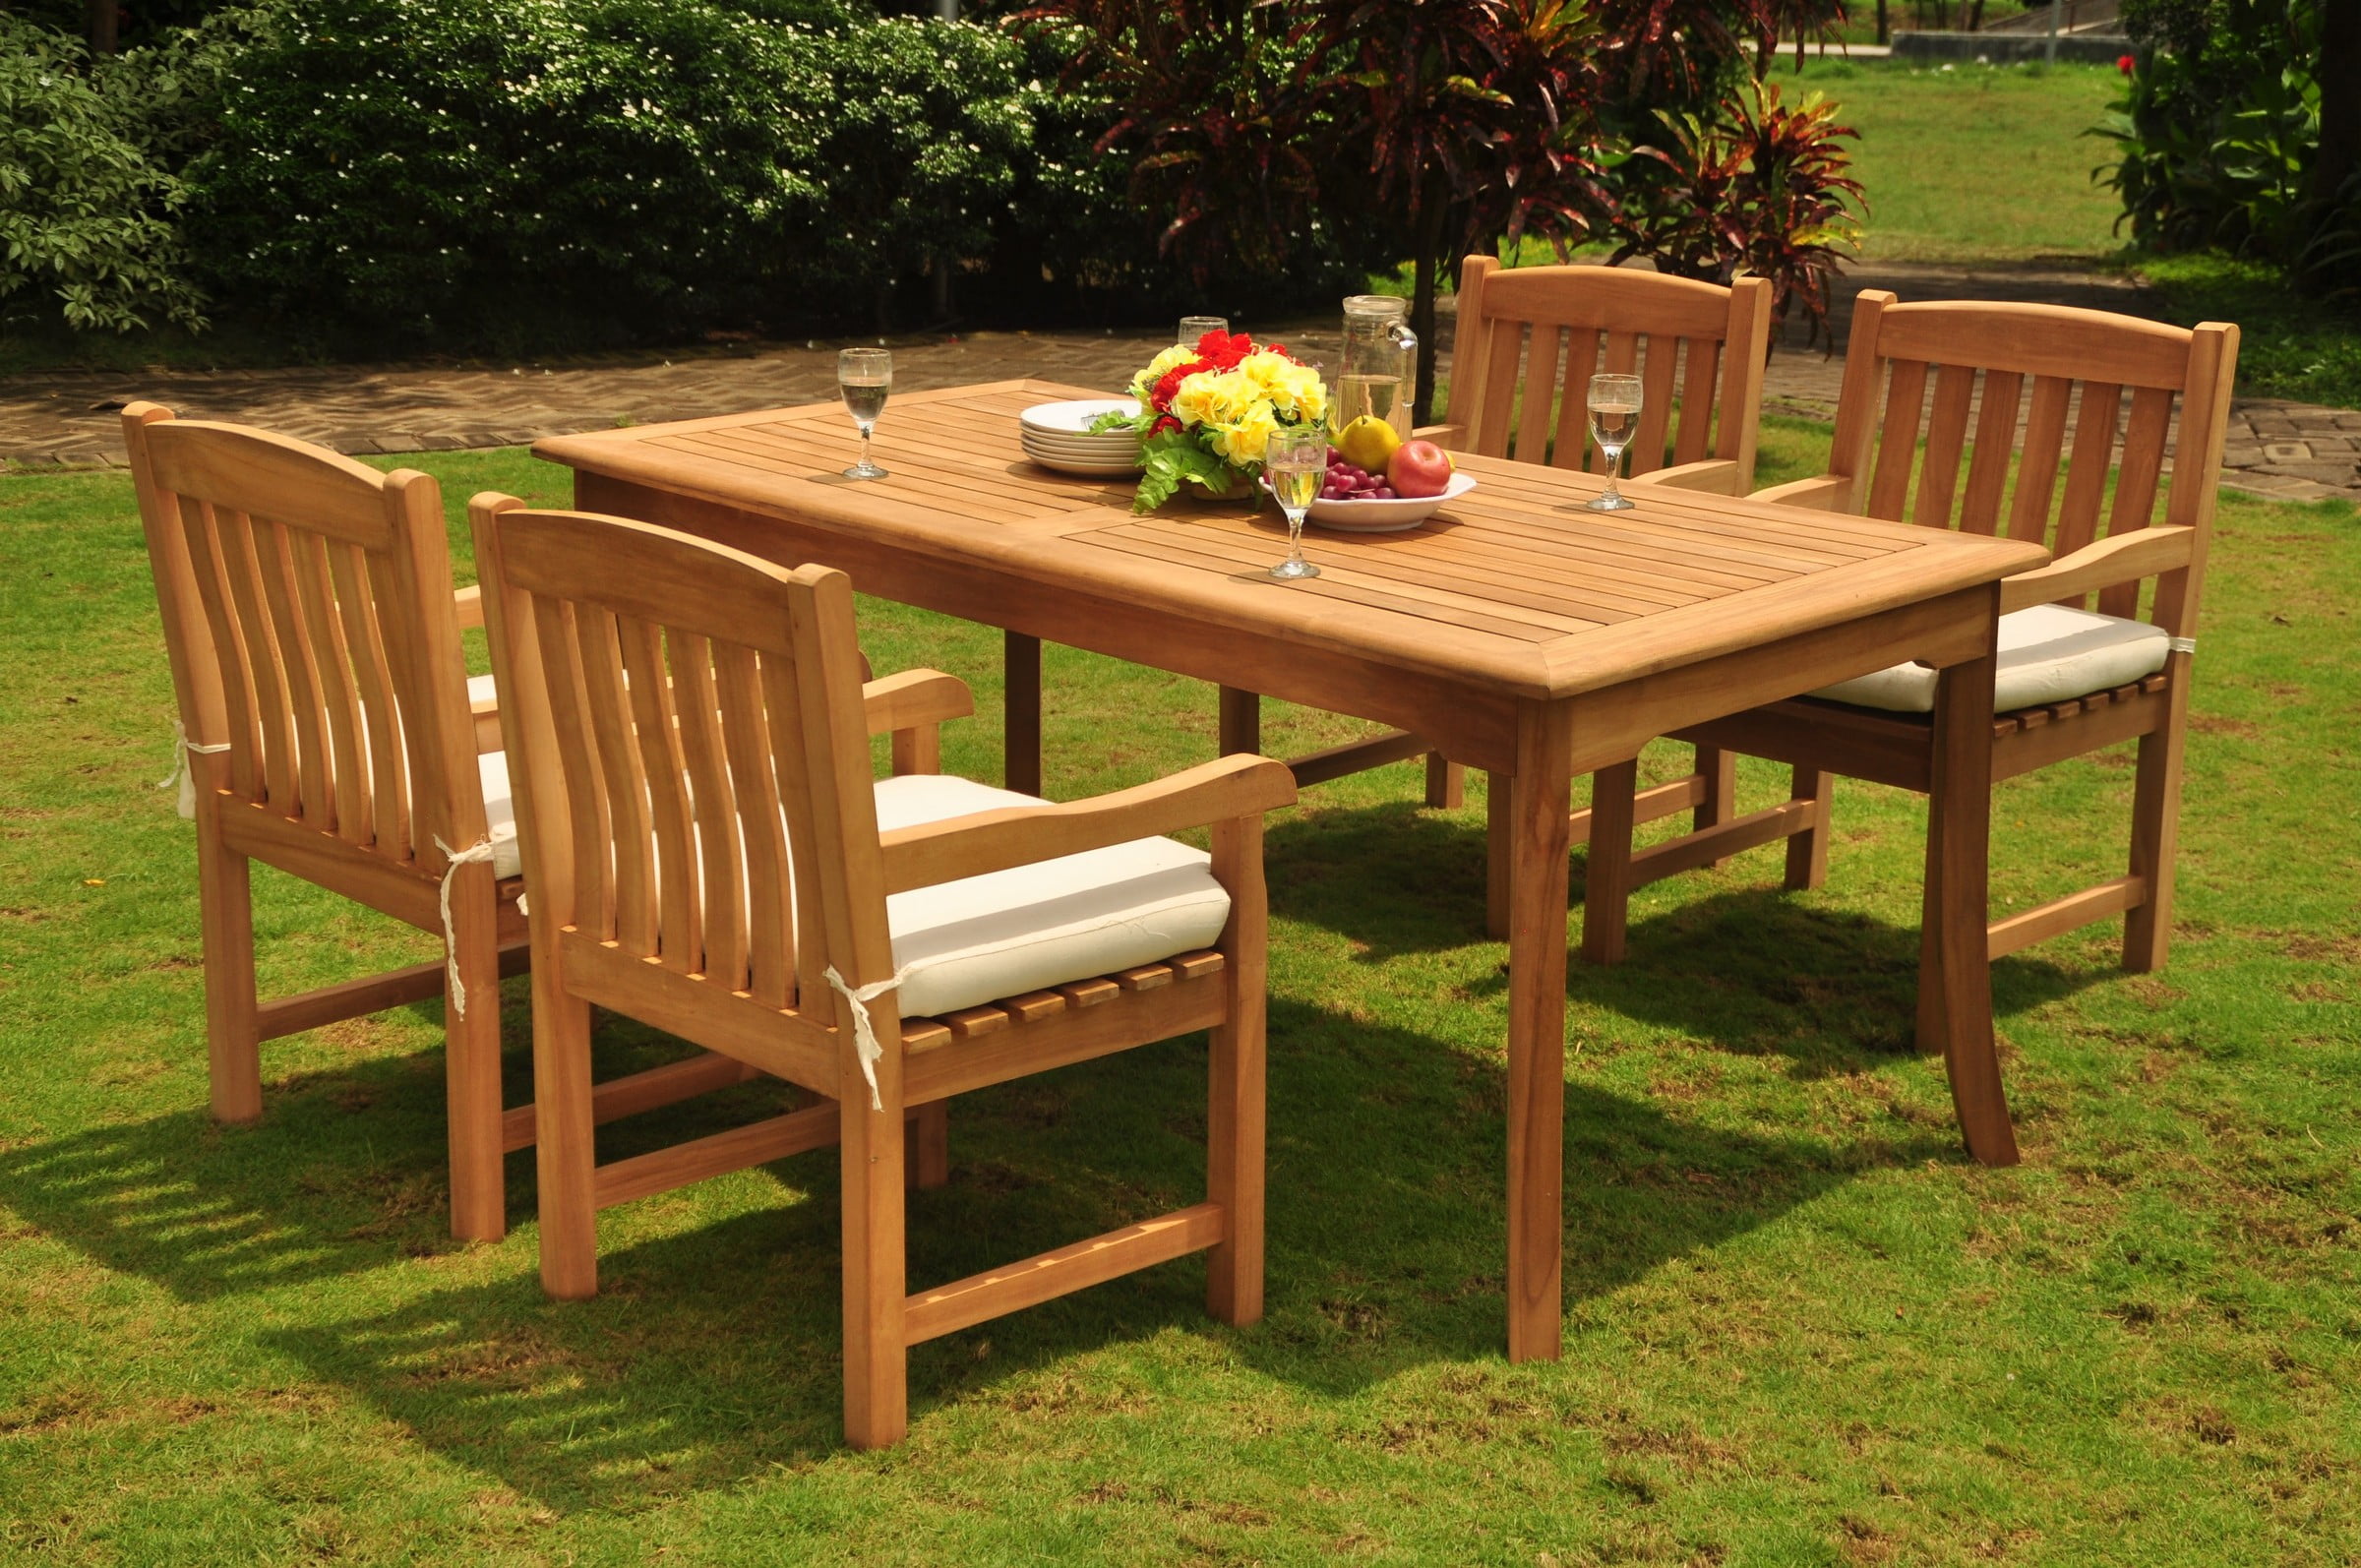 Why Teak Is The Best Wood For Outdoor Furniture